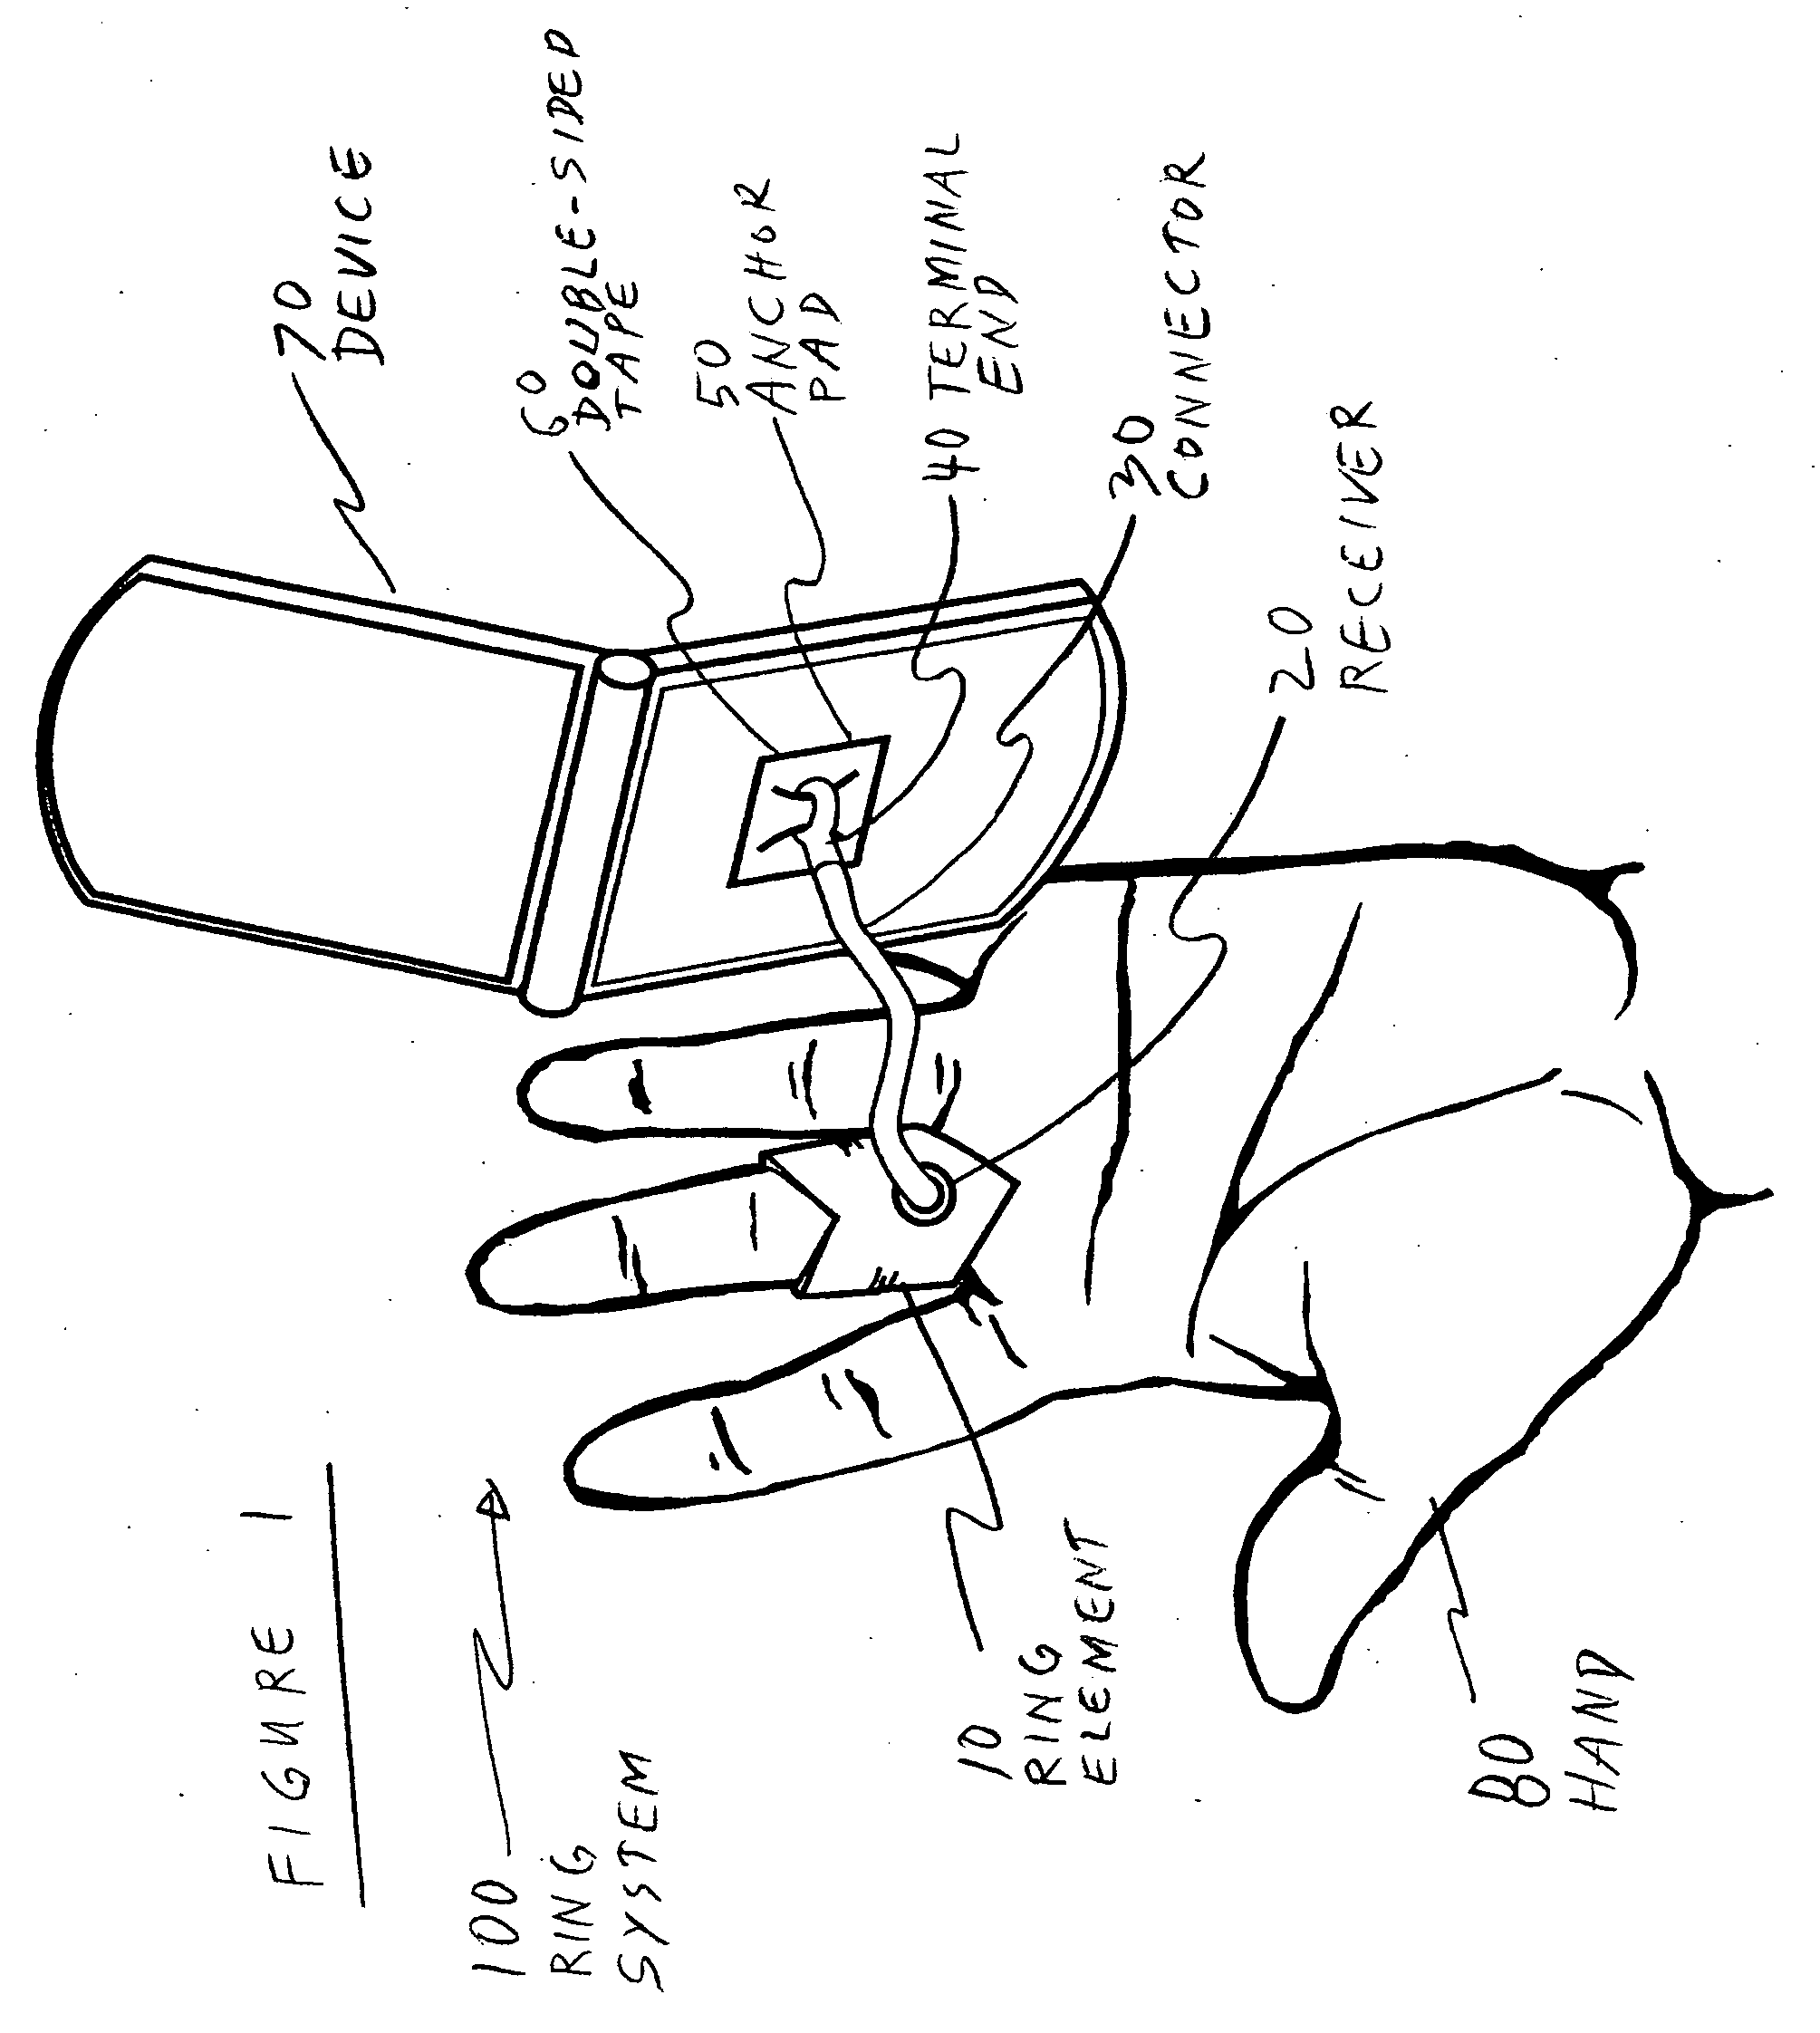 Ring system for securing devices